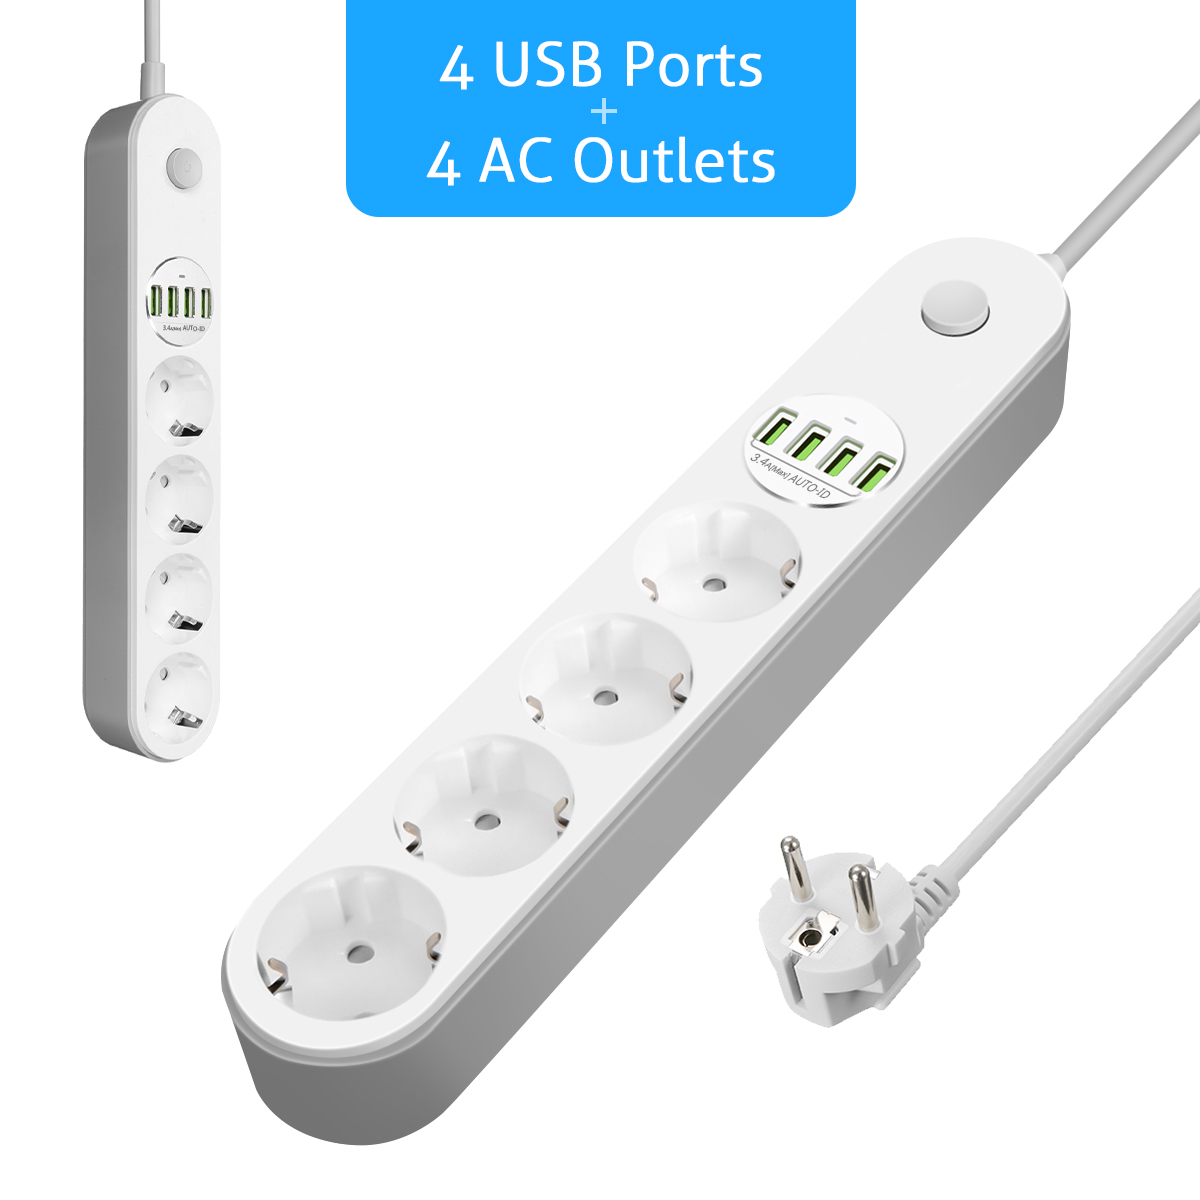 LDNIO-SE4432-Extension-Cord-Socket-Charger-With-4-USB-Ports--4-AC-Sockets-EU-Plug-Fast-Charging-For--1135687-1